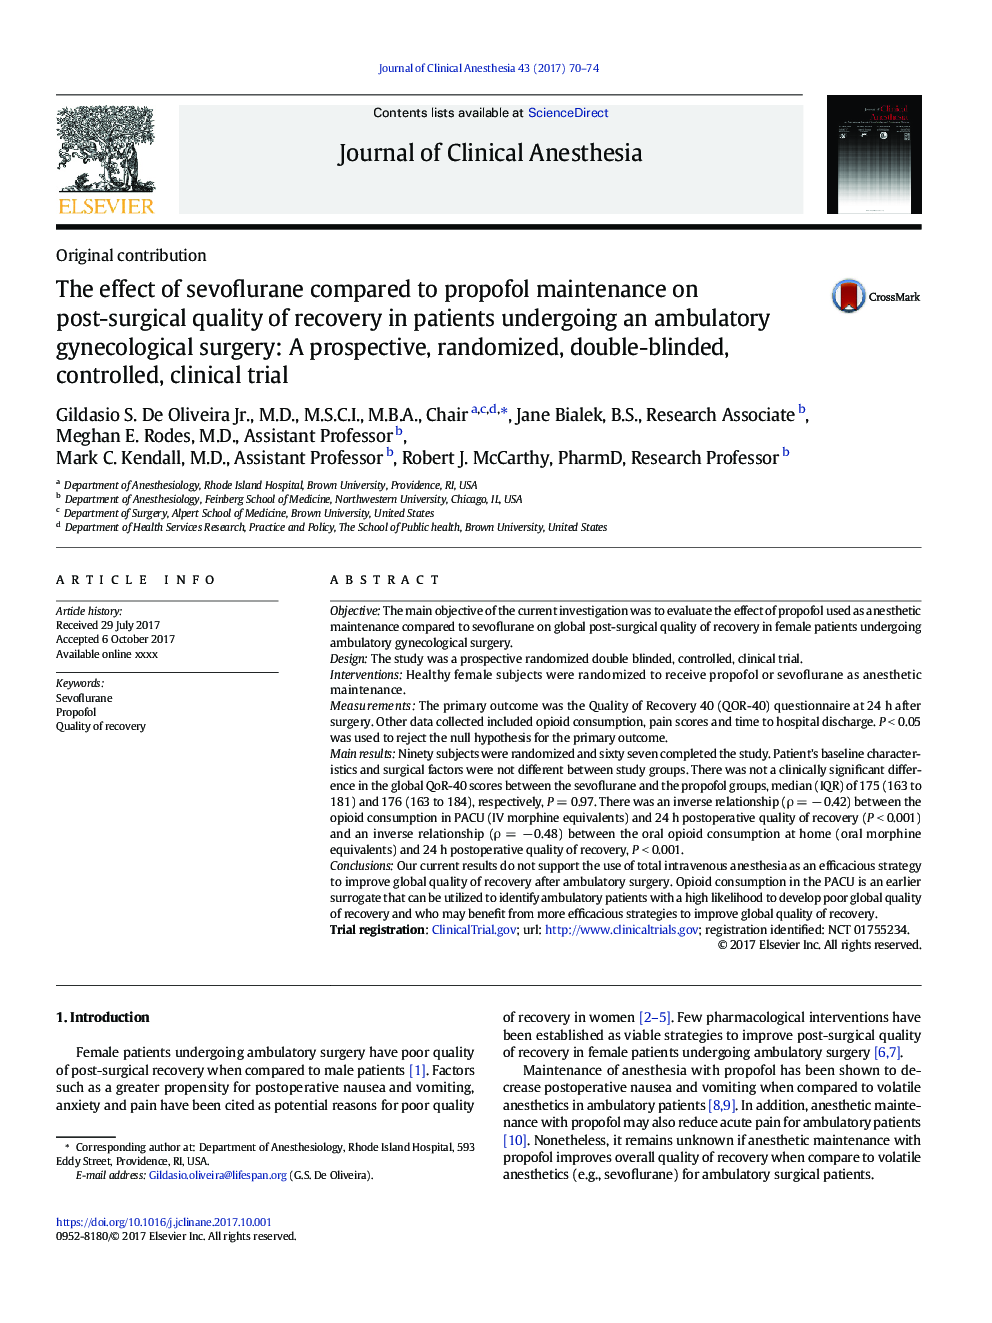 The effect of sevoflurane compared to propofol maintenance on post-surgical quality of recovery in patients undergoing an ambulatory gynecological surgery: A prospective, randomized, double-blinded, controlled, clinical trial